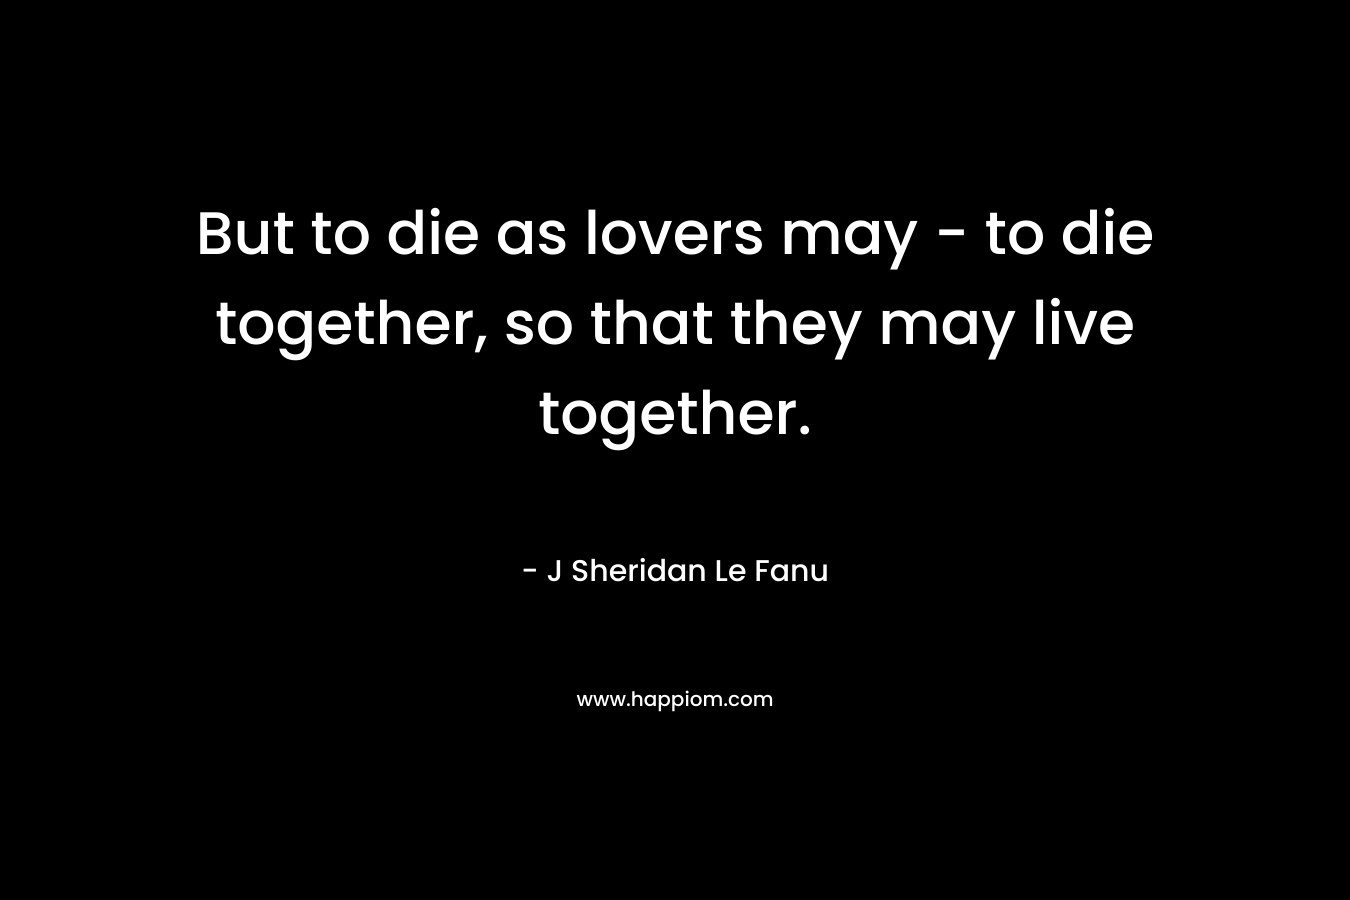 But to die as lovers may – to die together, so that they may live together. – J Sheridan Le Fanu